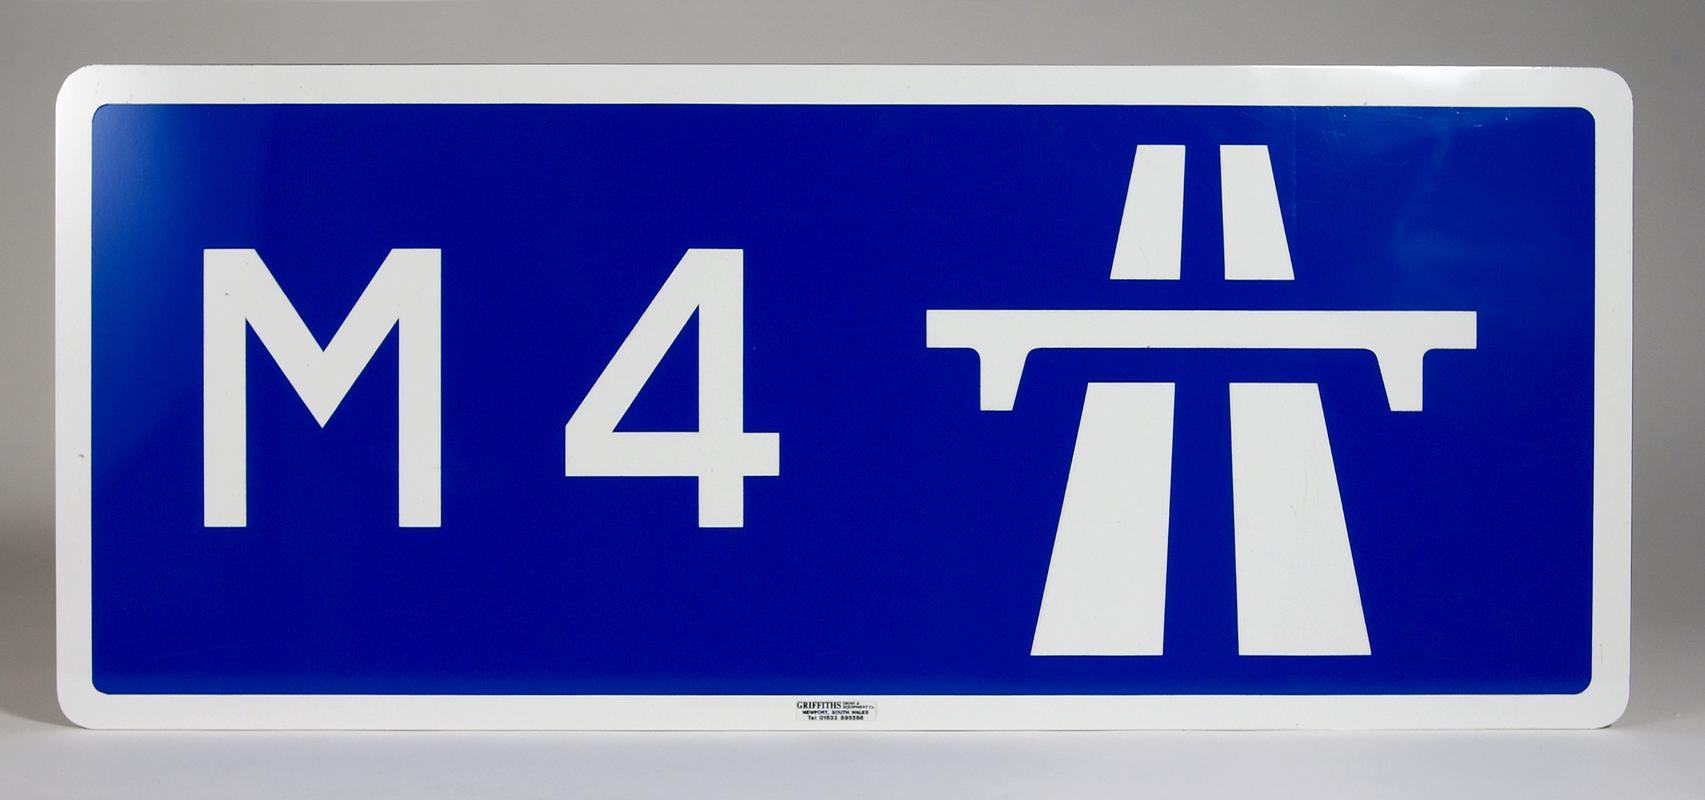 M4 road sign made by Griffiths Signs & Equipment Company of Rogerstone